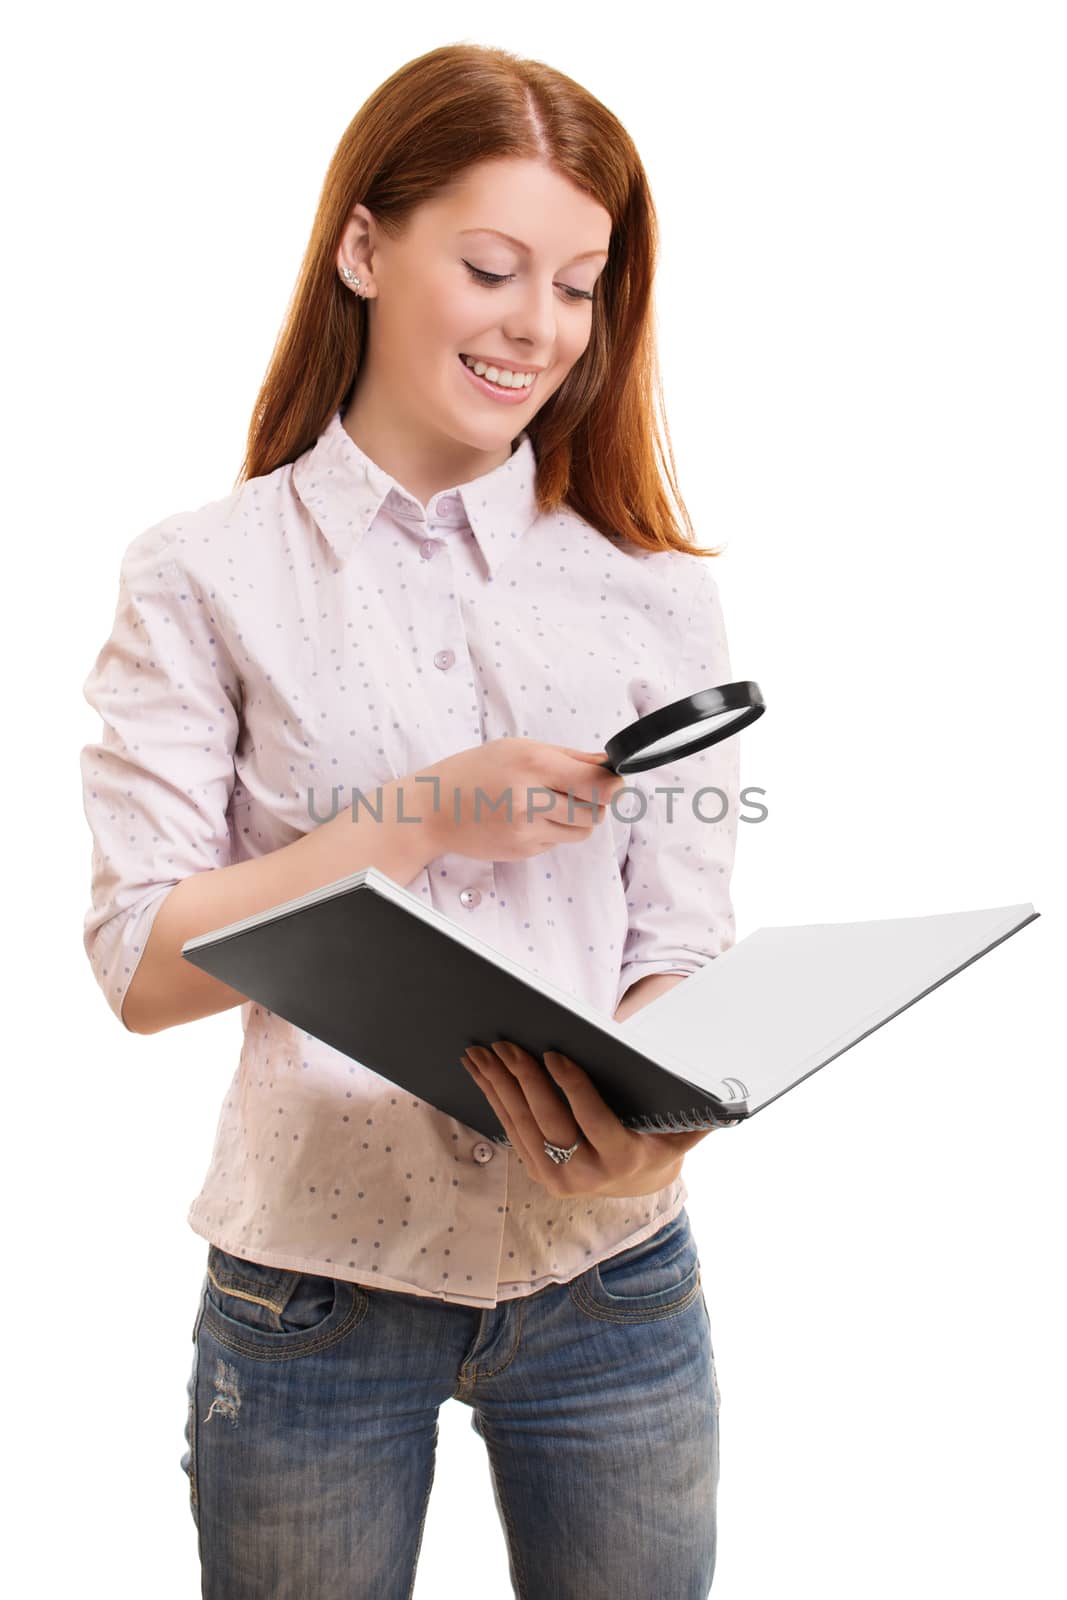 Research concept. Portrait of a beautiful smiling female in smart casual clothes, looking through a magnifying glass at an open book, isolated on white background.